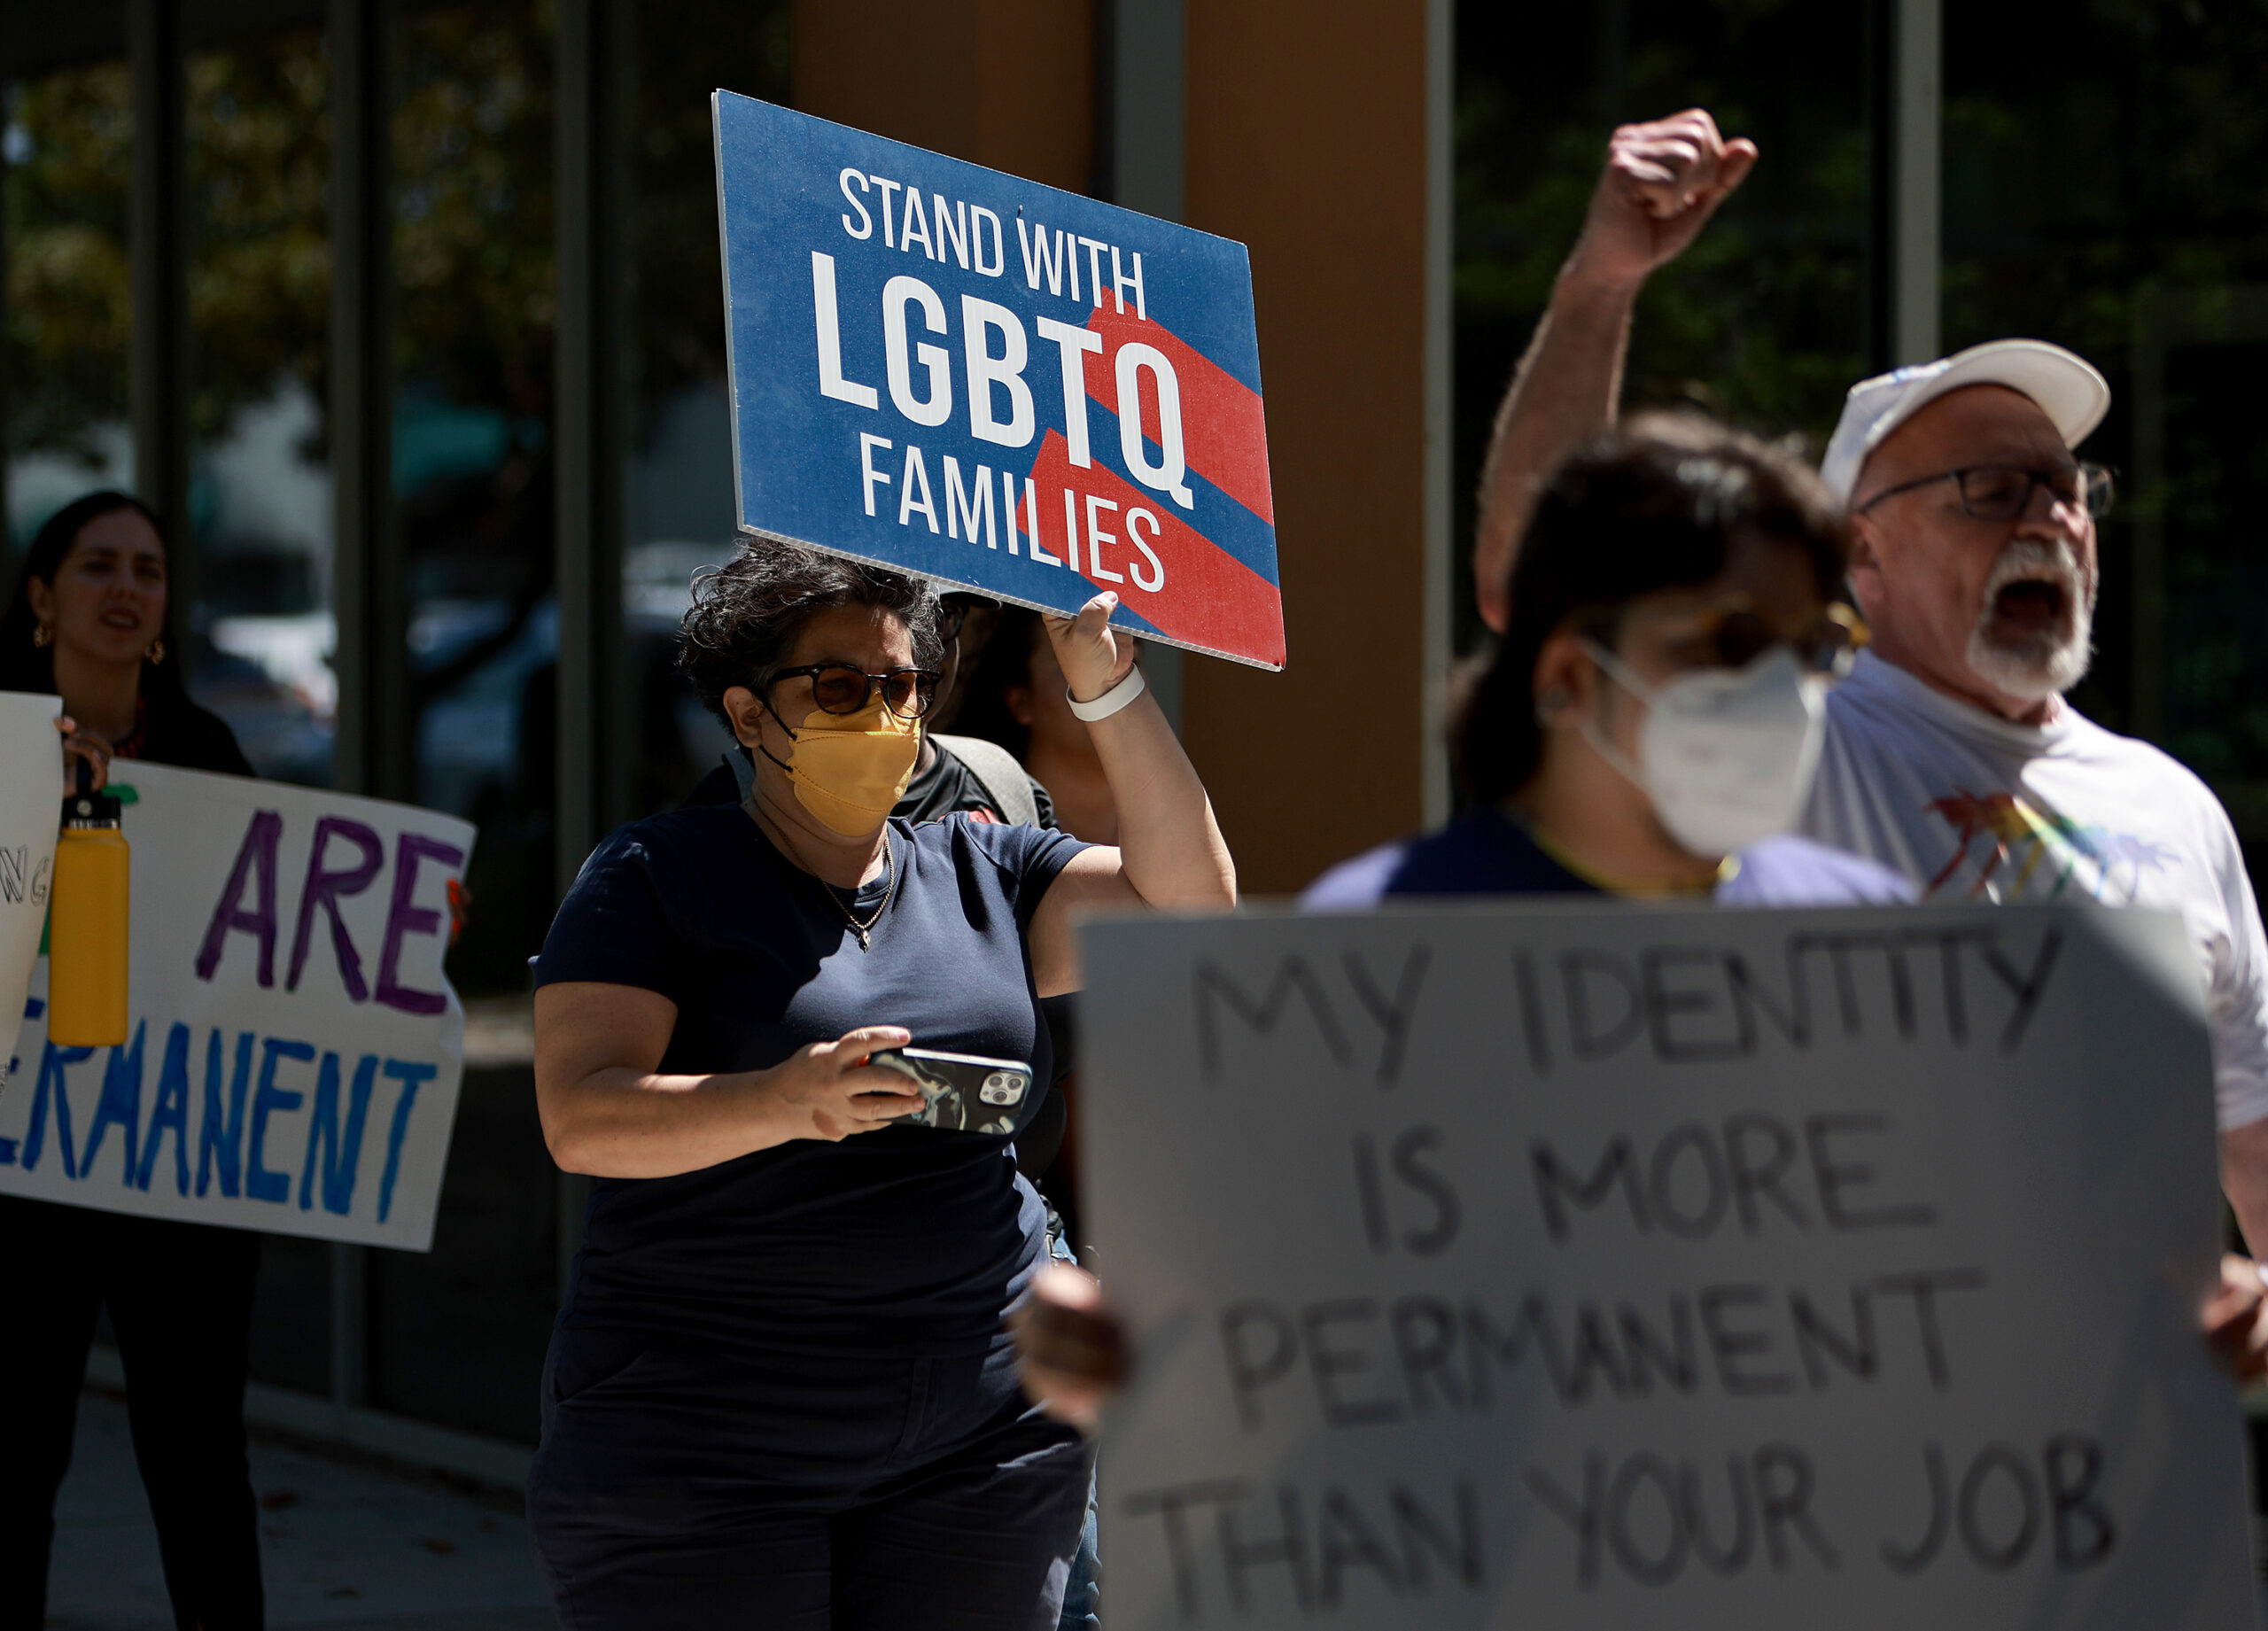 Slim Majorities of Voters Back Provisions of Florida's 'Don't Say Gay' Bill